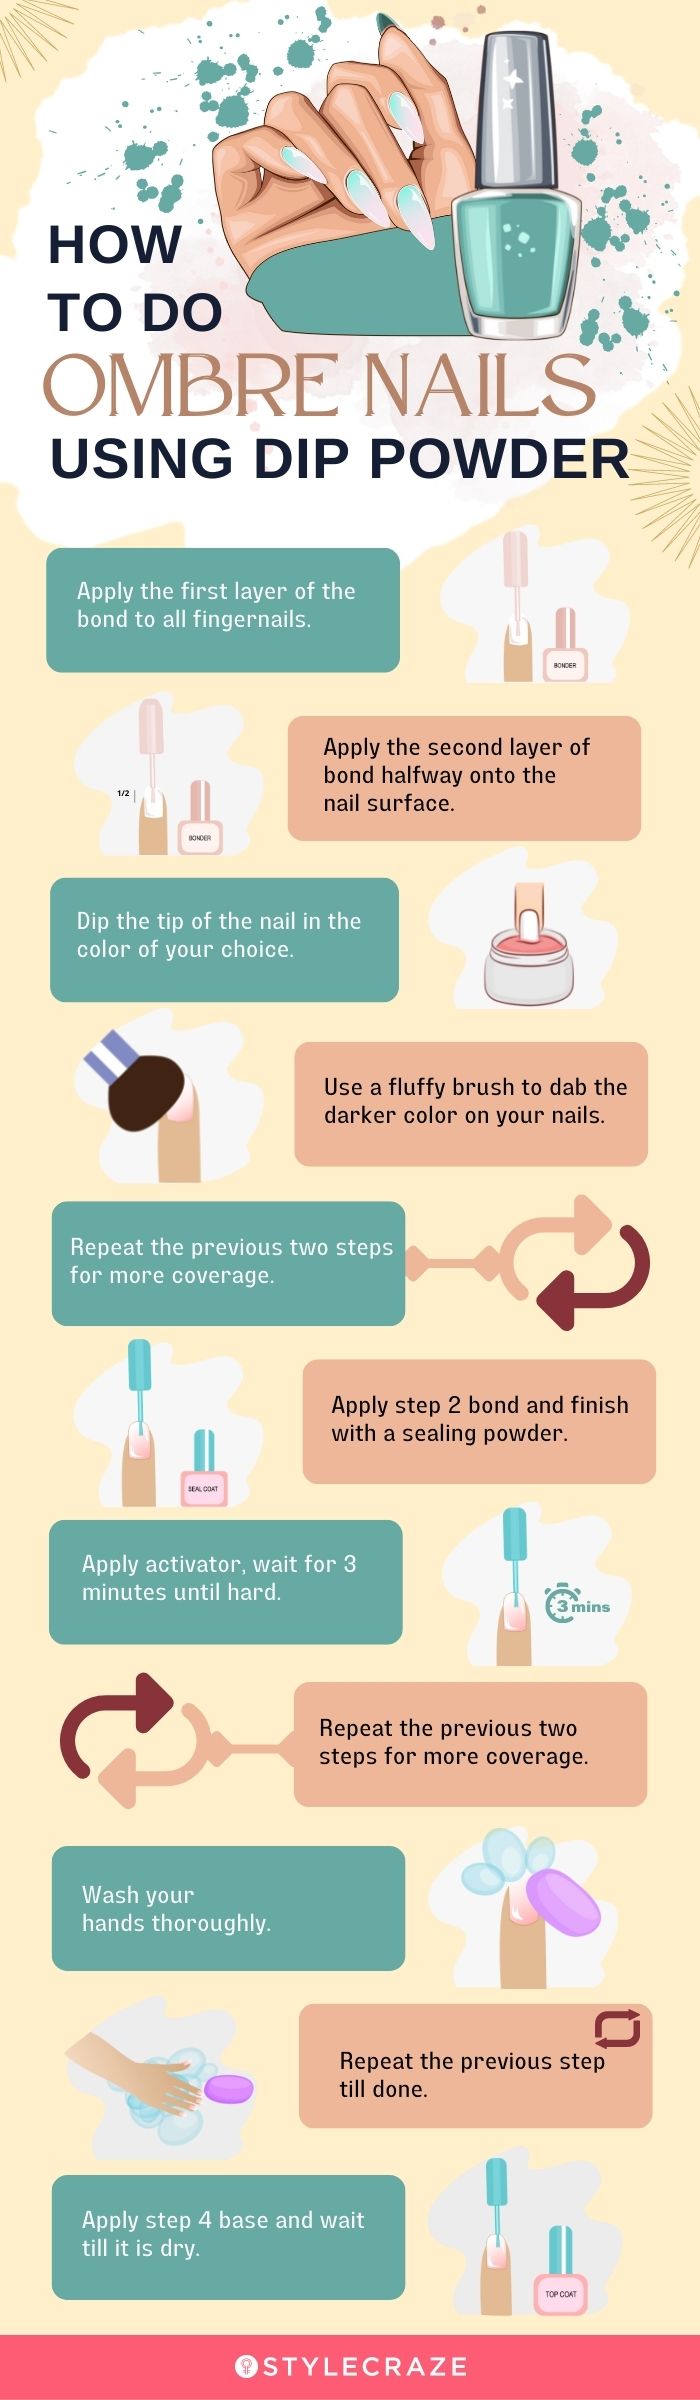 how to do ombre nails using dip powder (infographic)